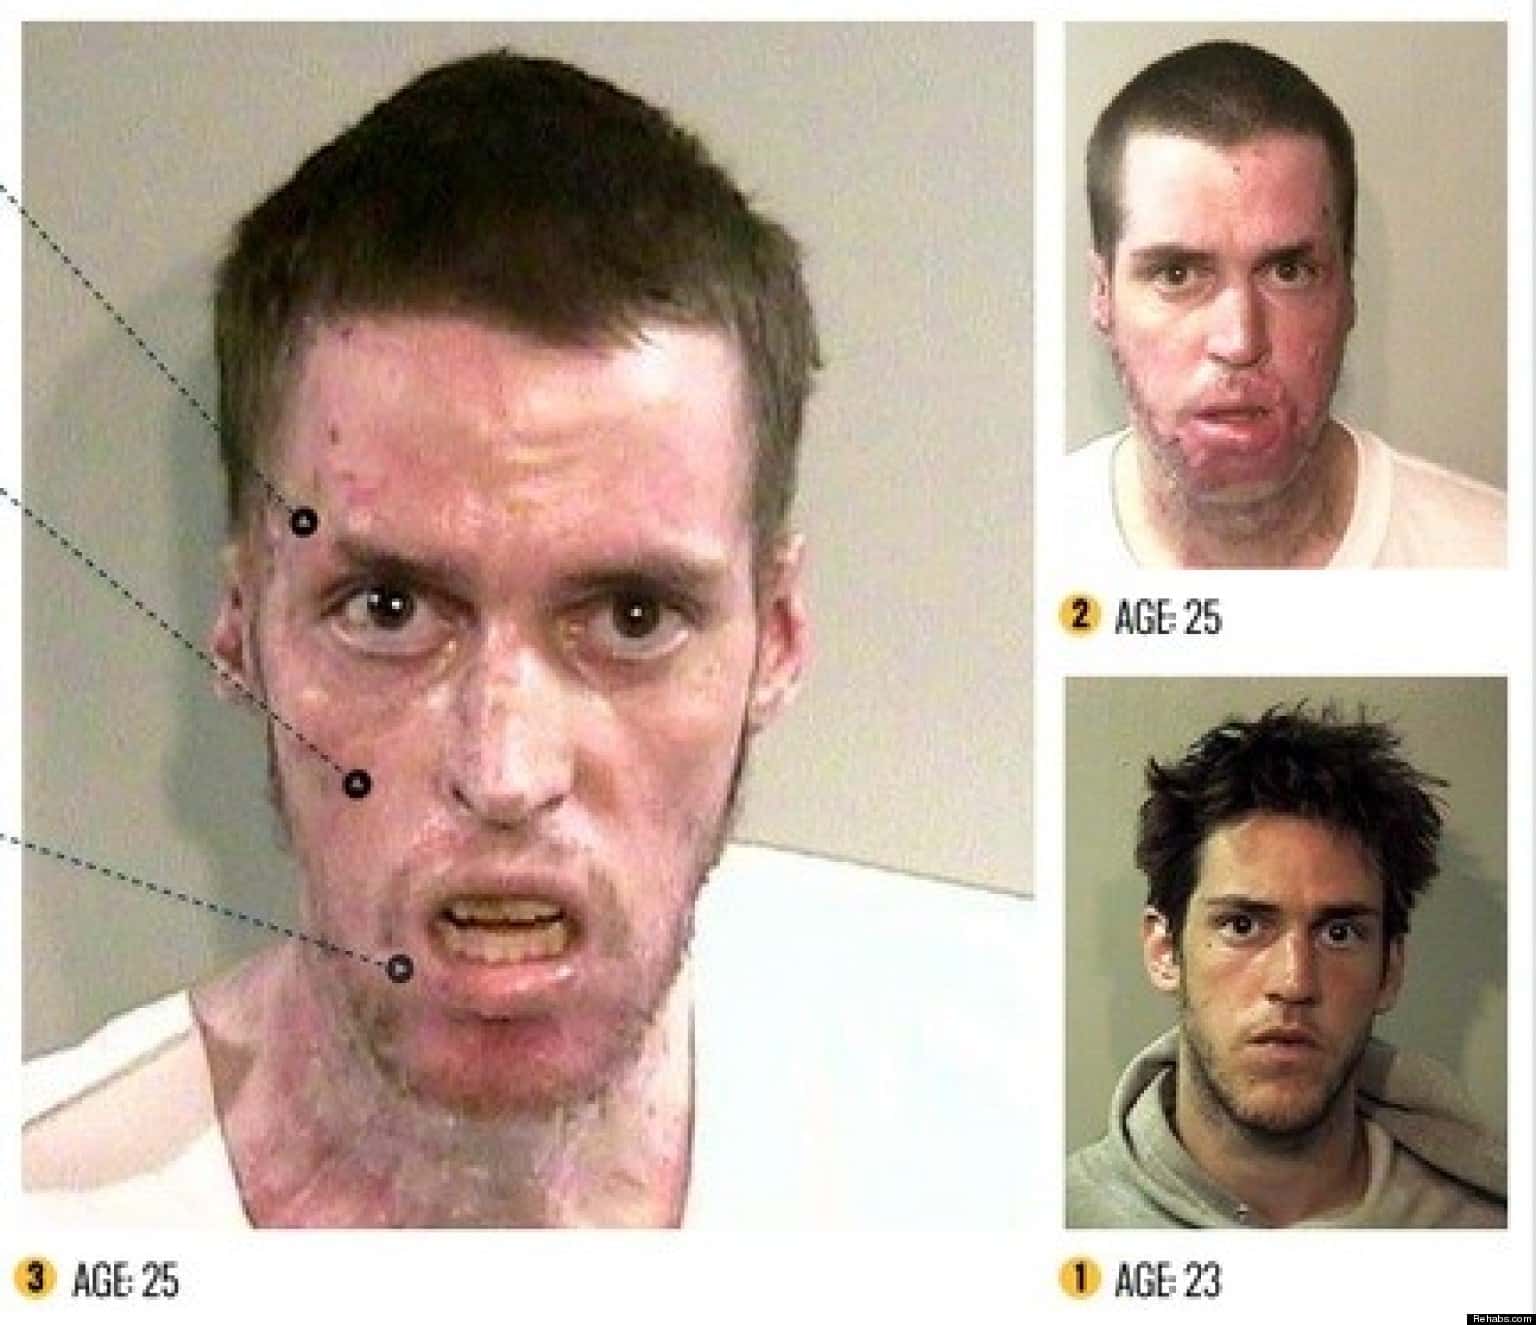 Horrors Of Methamphetamines By Rehabs.com Shows Faces Ravaged By ...